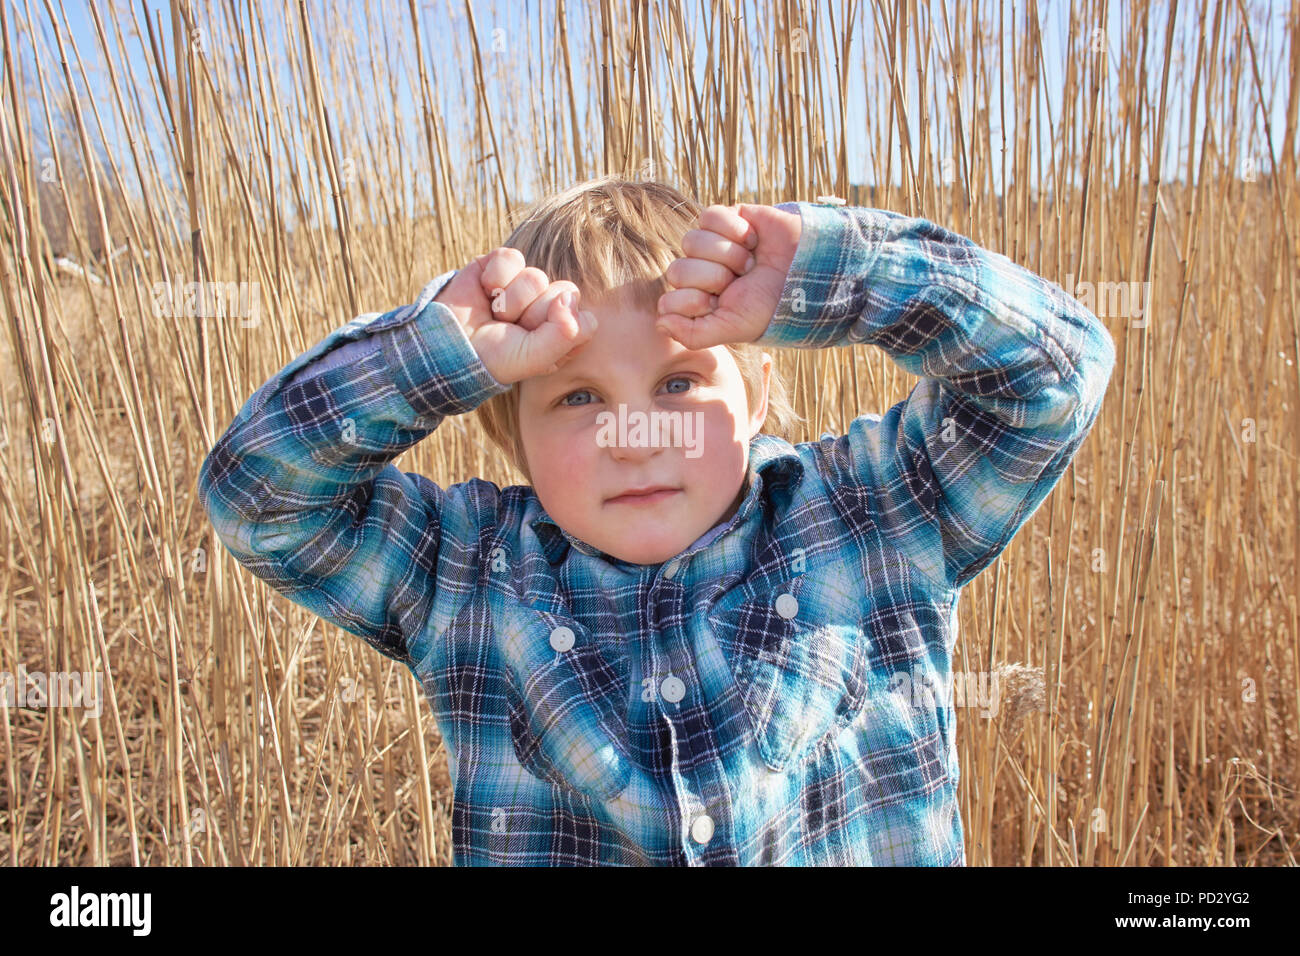 Boy with hands raised in reeds, portrait Stock Photo